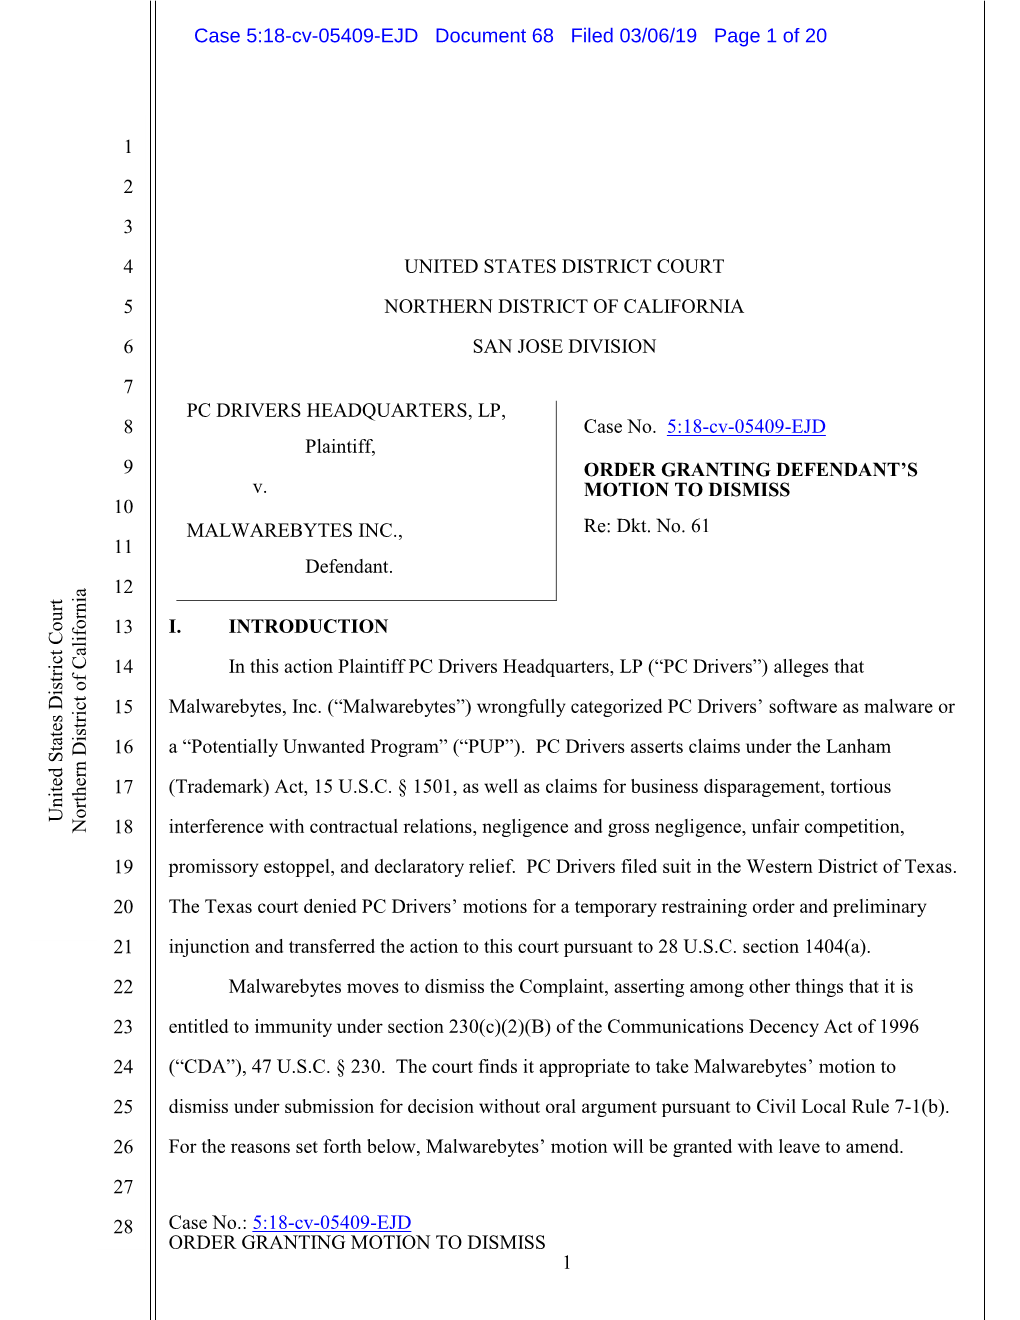 Case 5:18-Cv-05409-EJD Document 68 Filed 03/06/19 Page 1 of 20